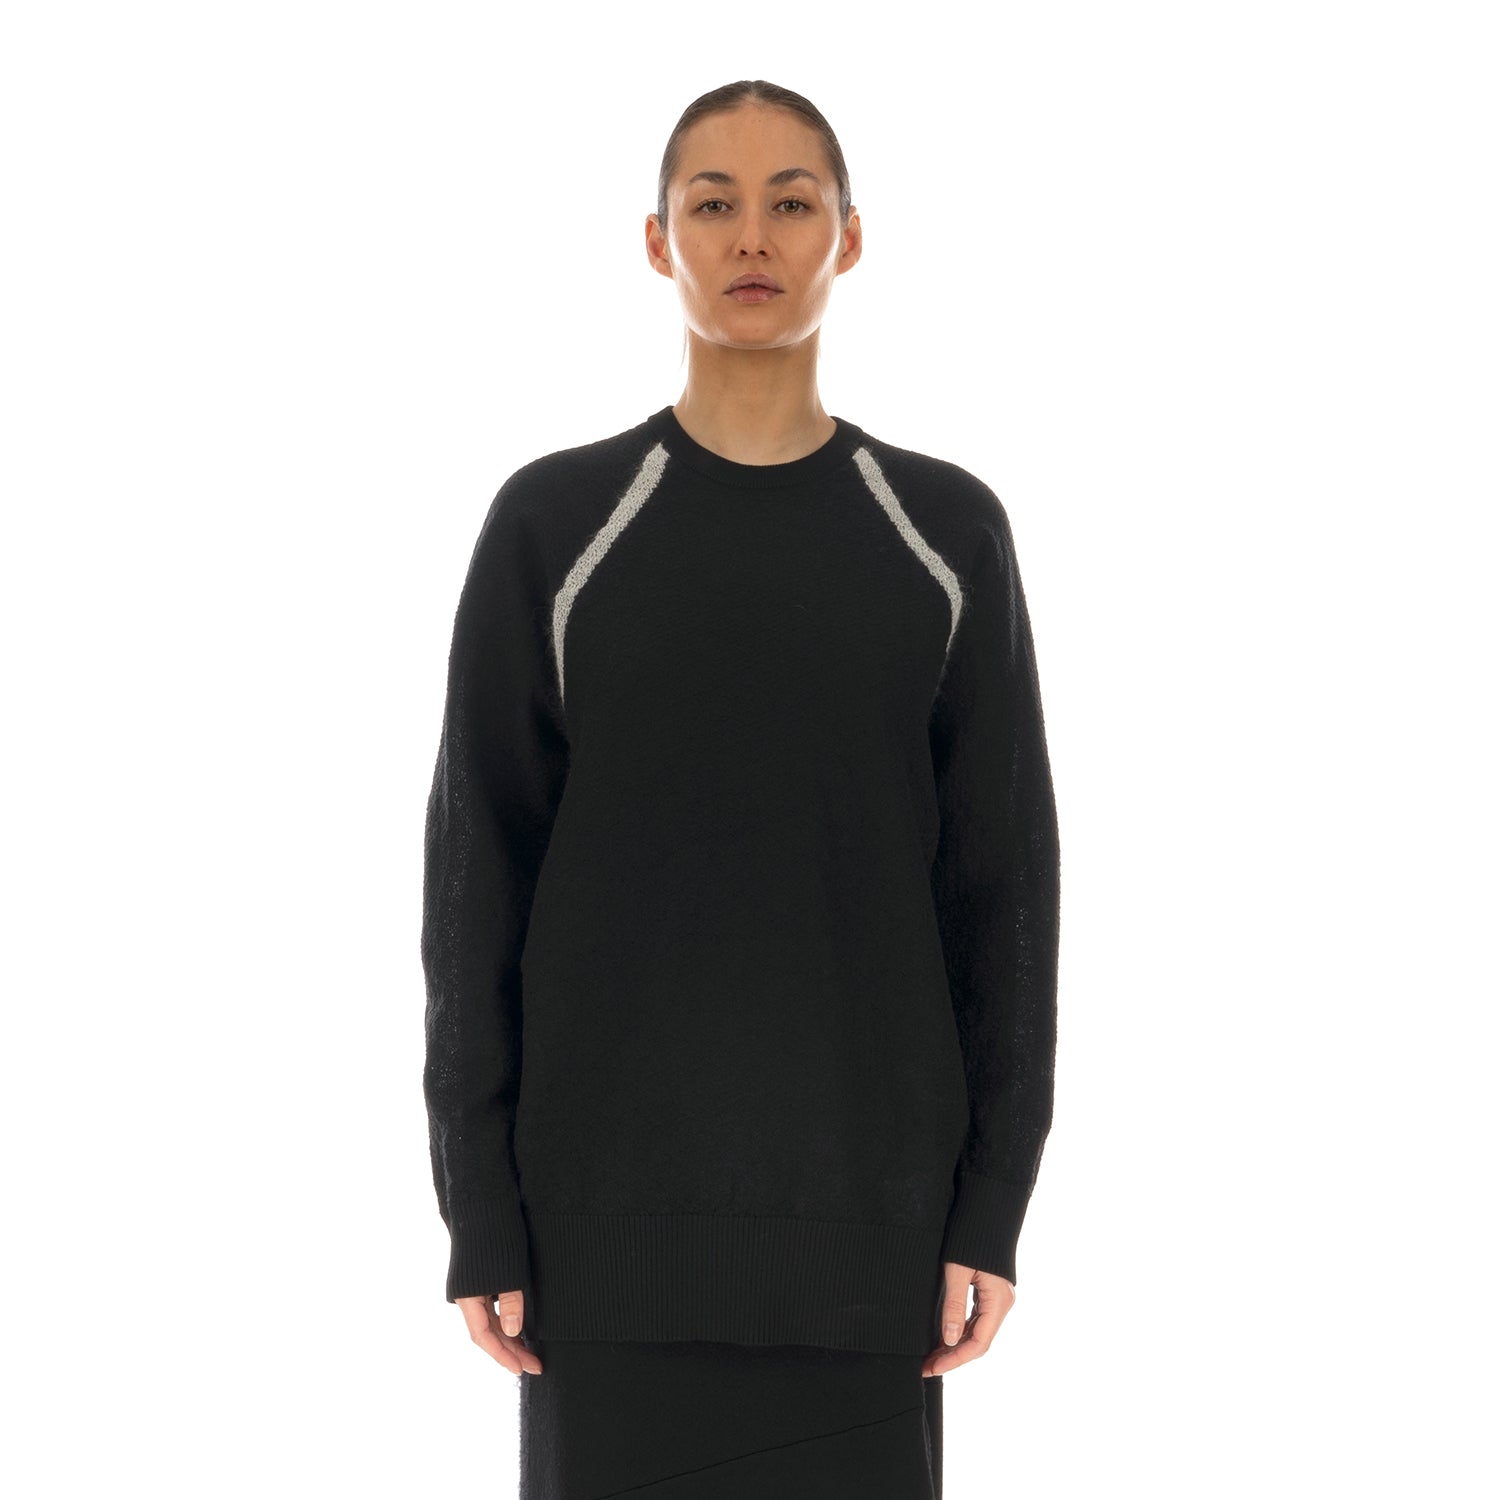 adidas Y-3 | Womens Classic Sheer Knit Crew Sweater Black | Concrete